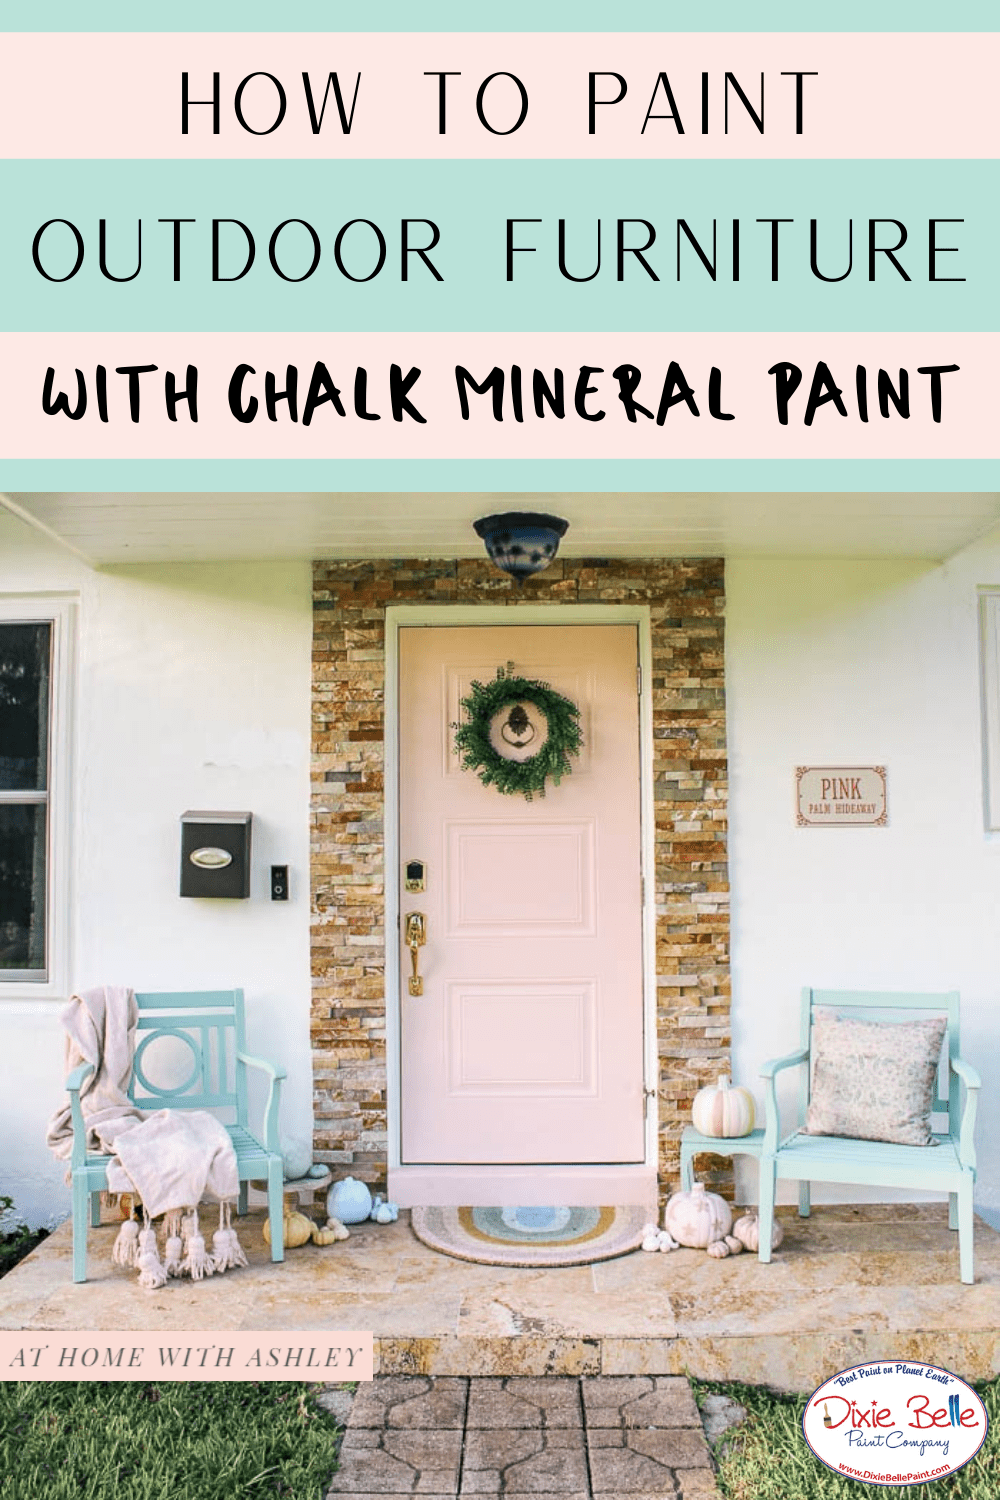 Painting Outdoor Furniture